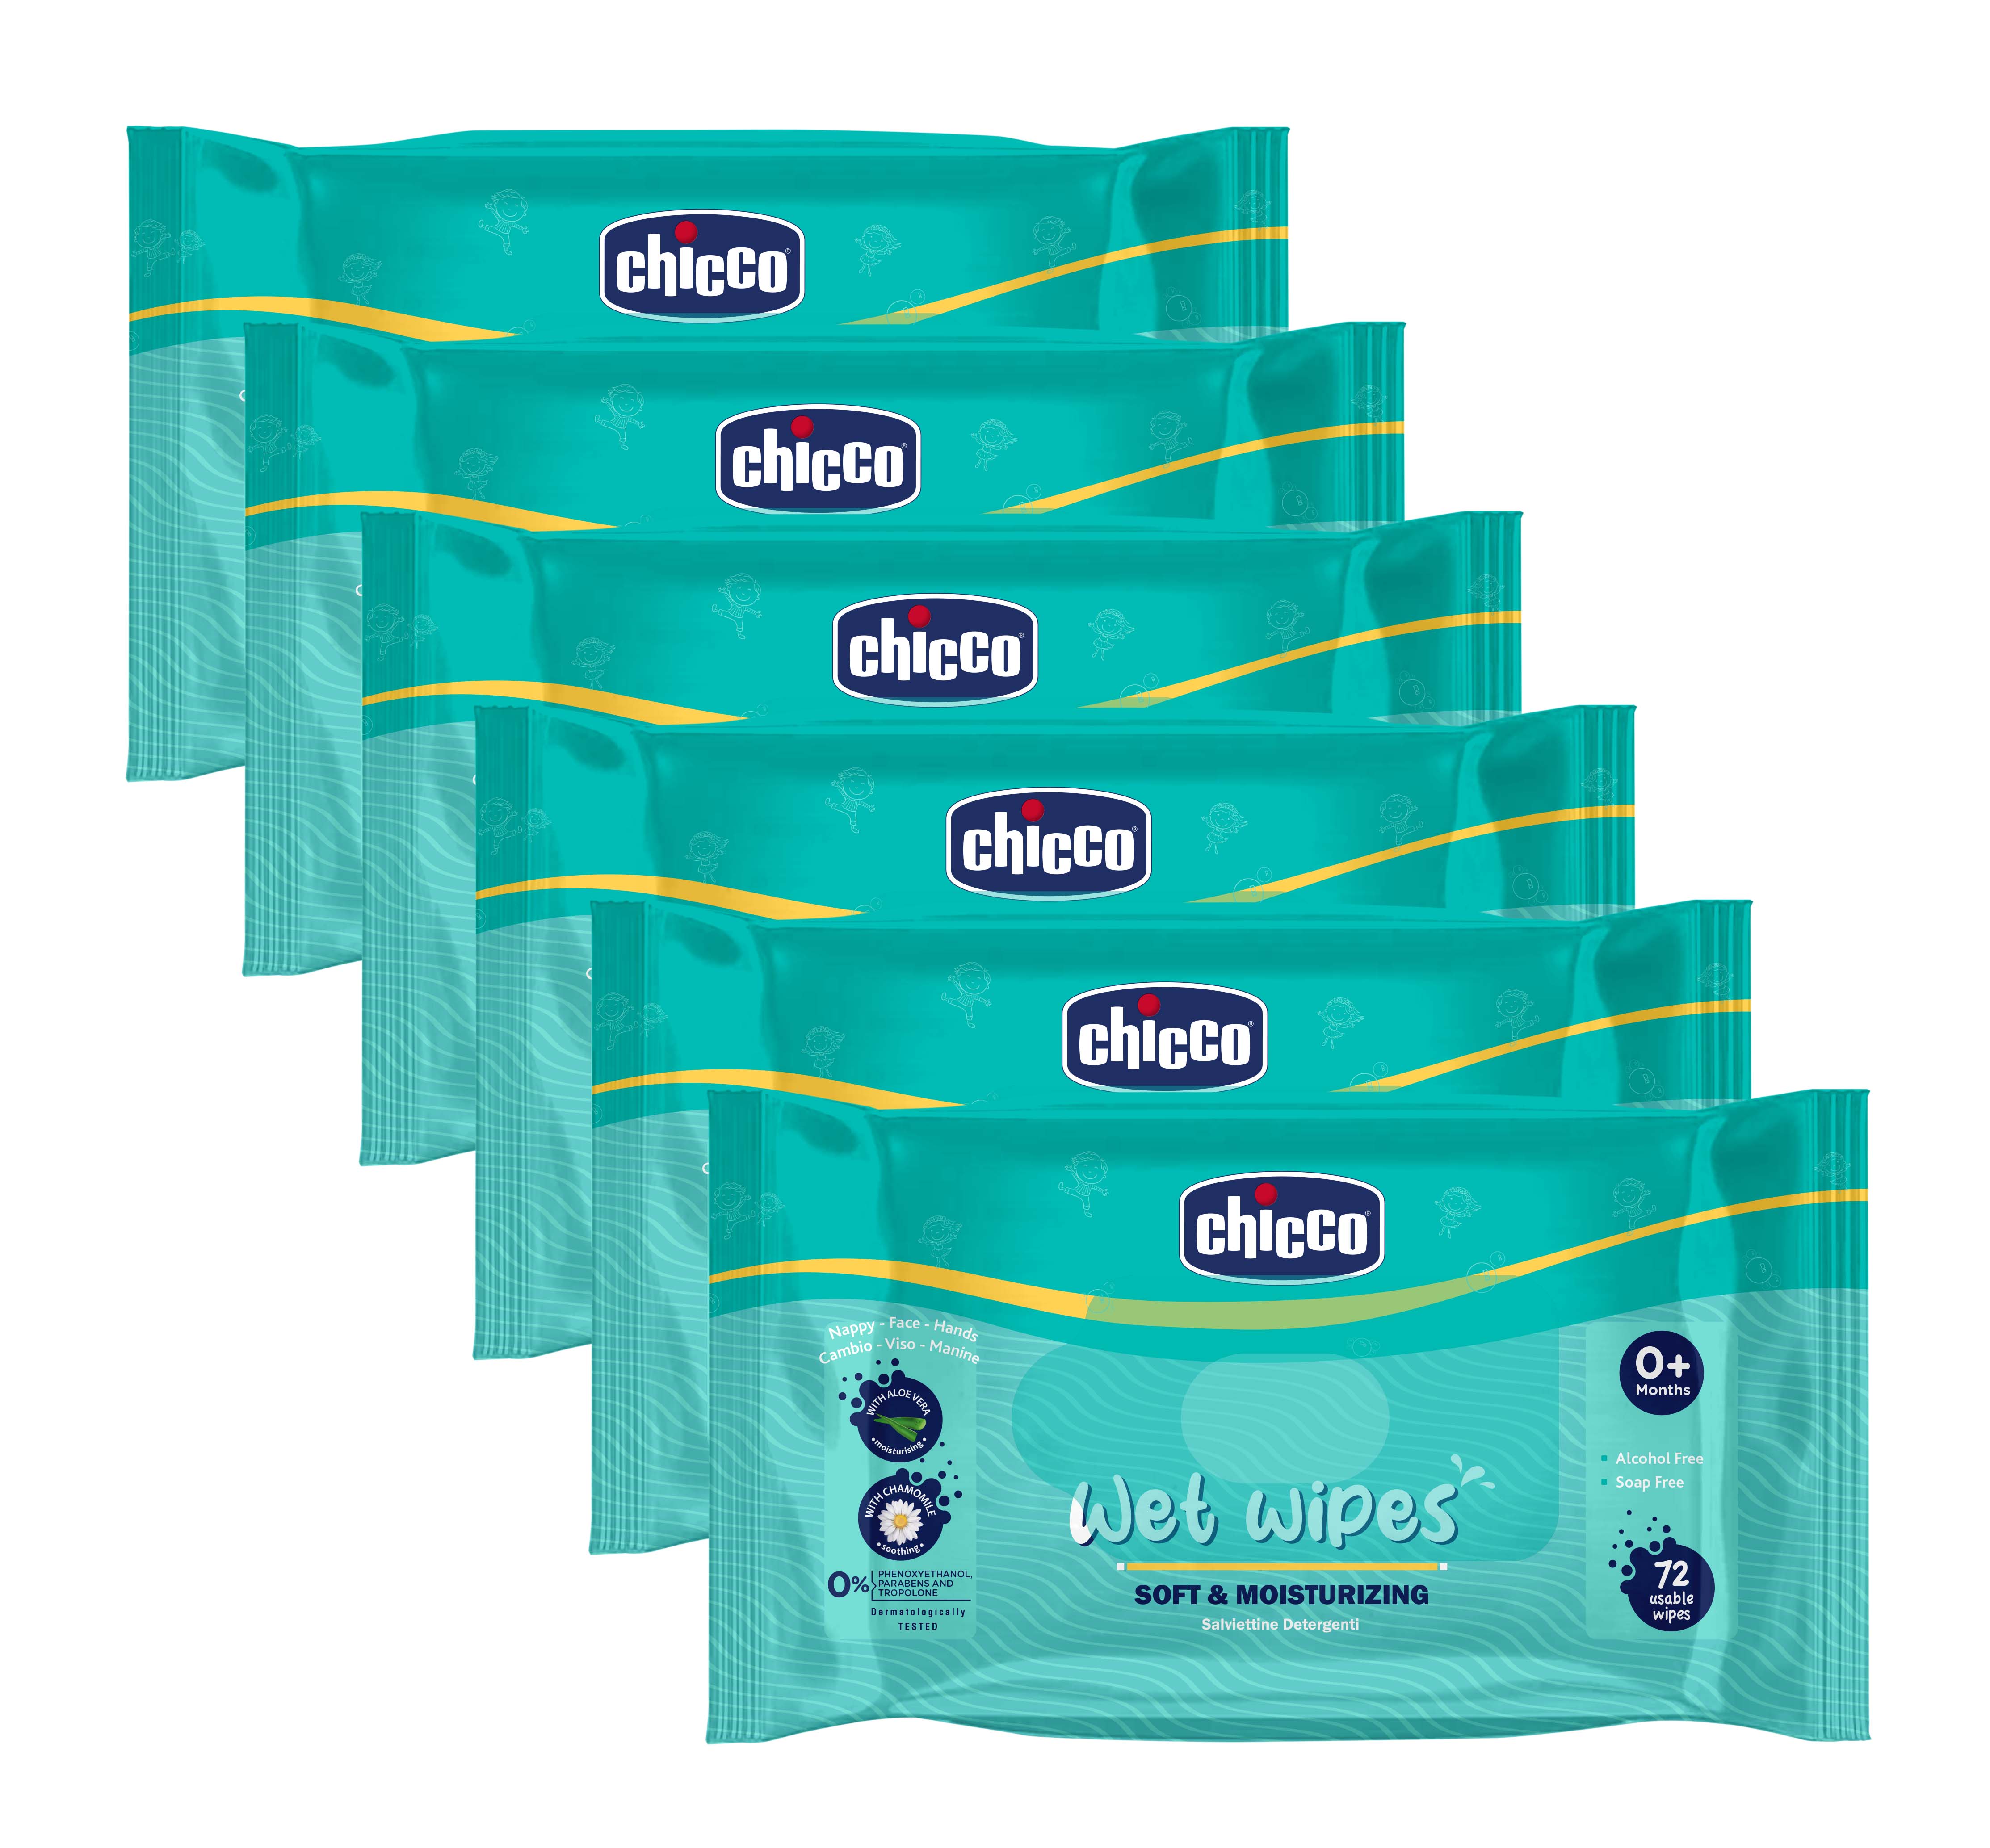 Chicco Wetwipes Pack of 3-432 PCS